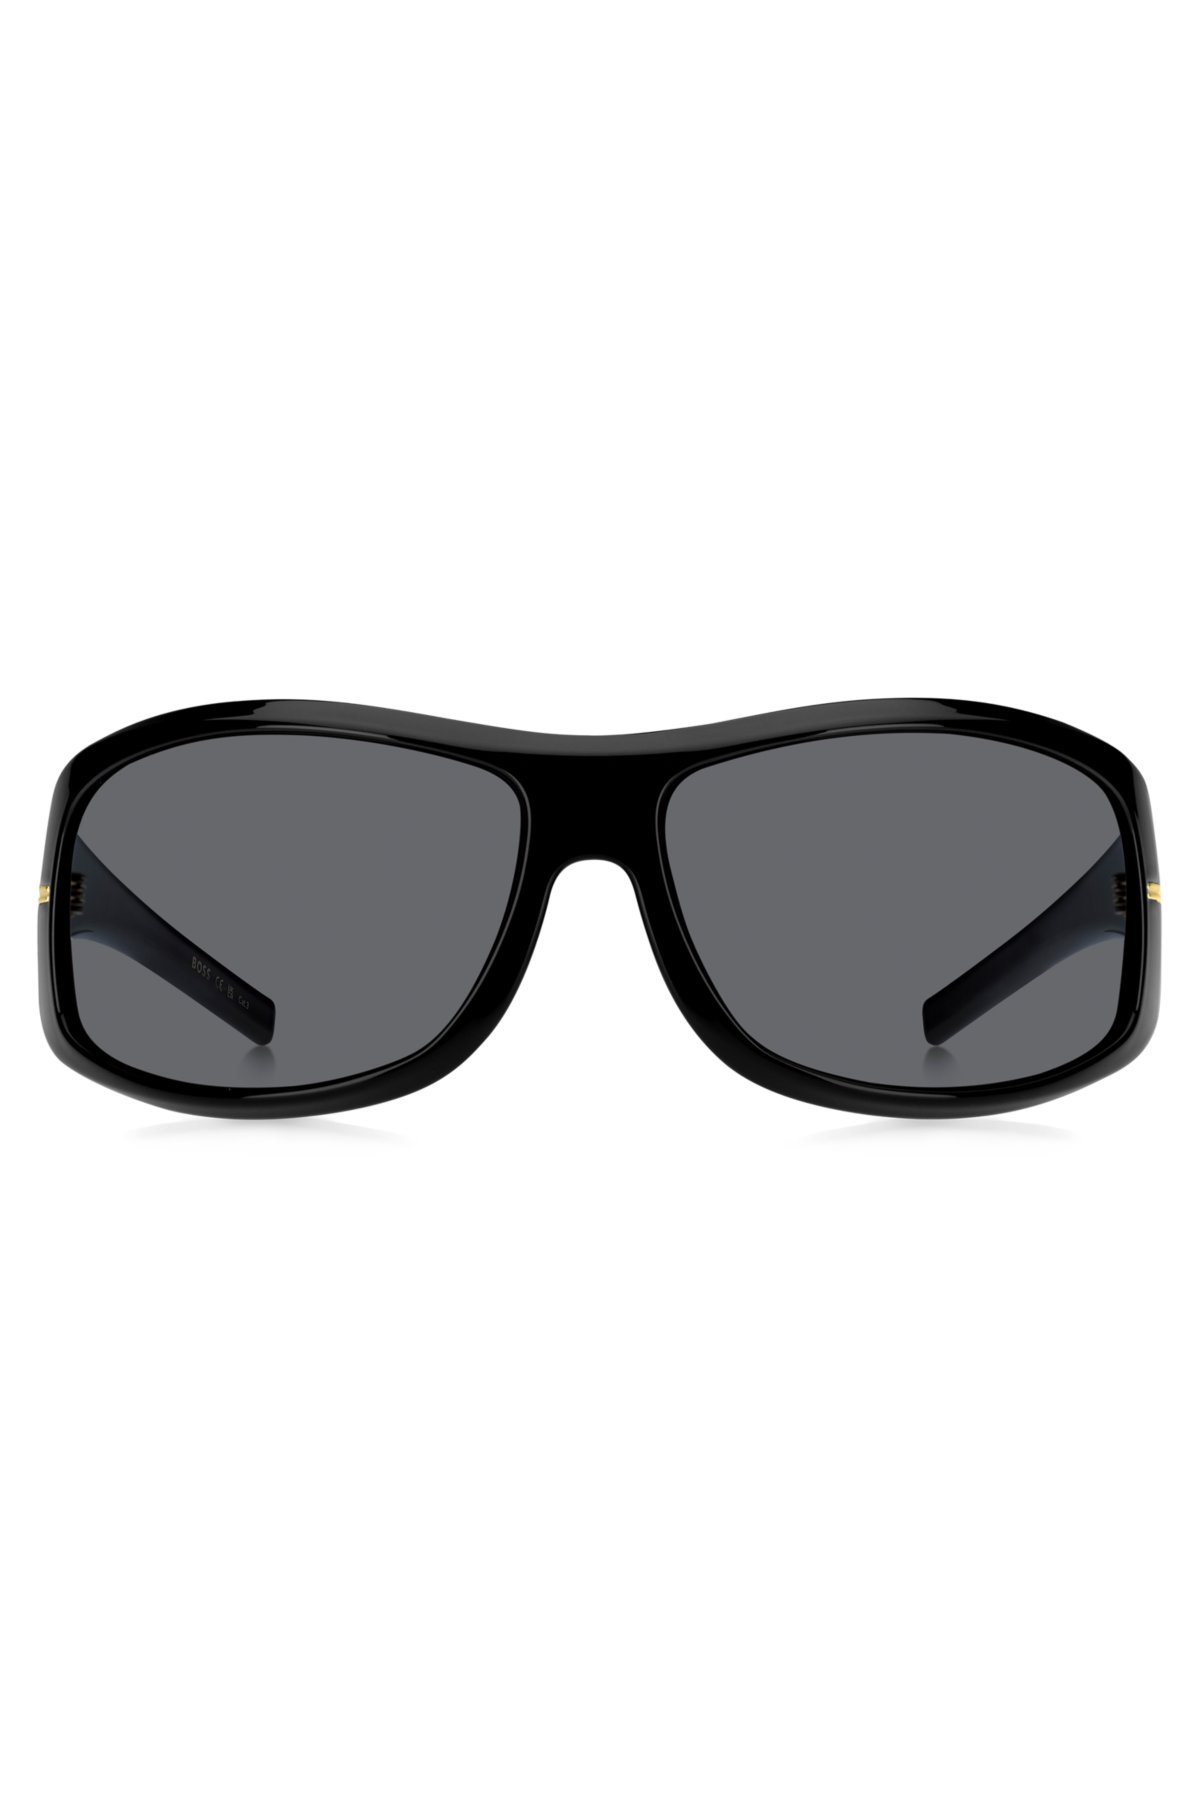 Mask-style sunglasses in black with gold-tone hardware, Black